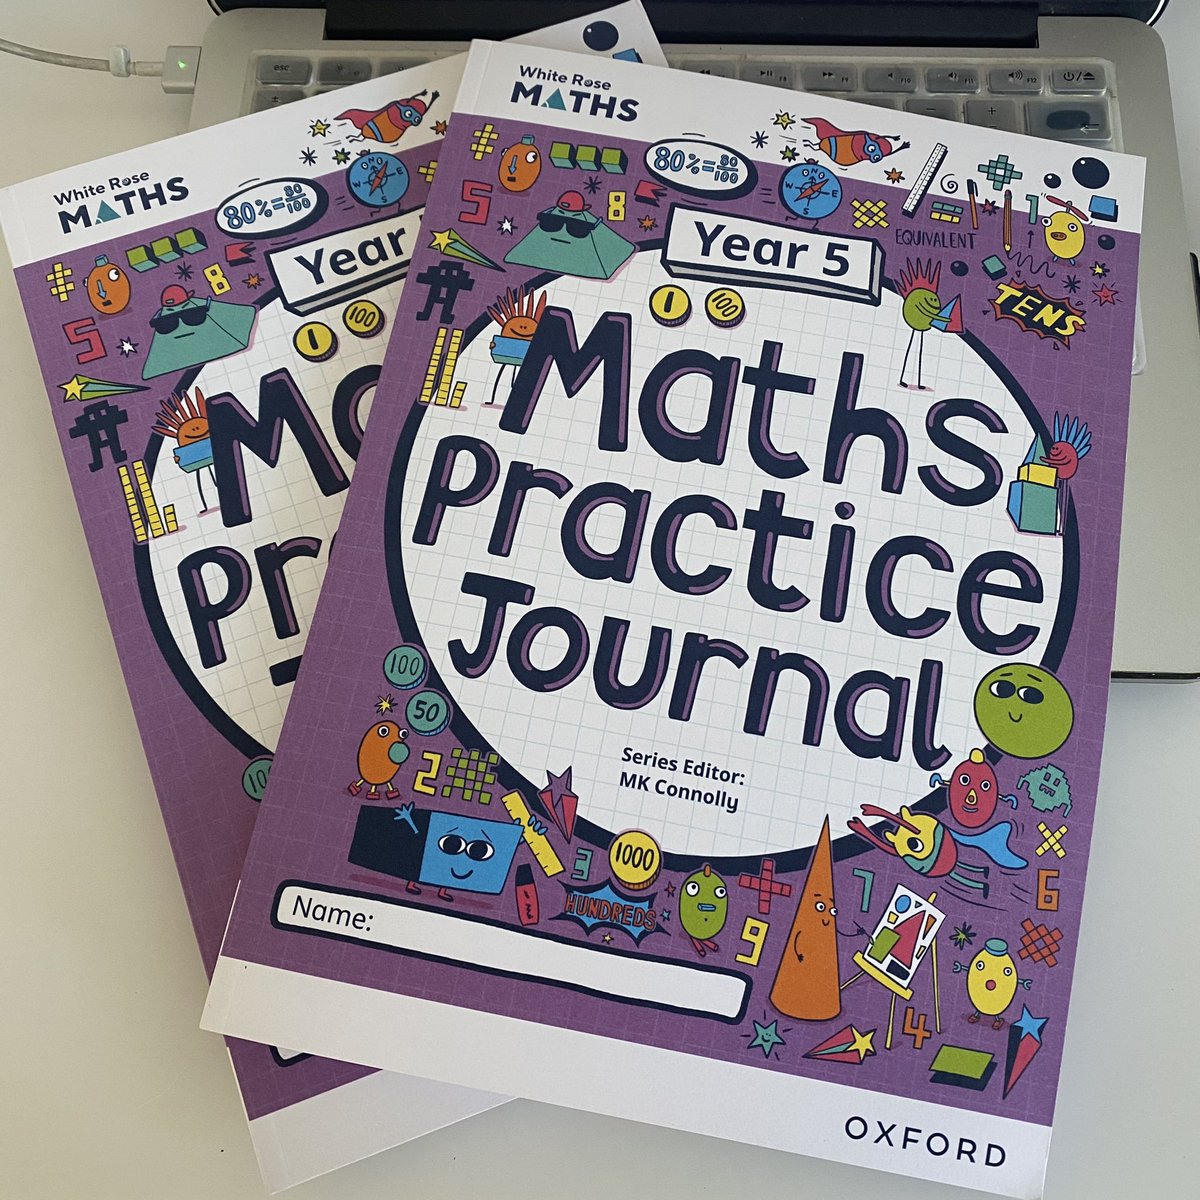 Not vocabulary related…but I bought these yesterday to use with my twins who are both in Year 5. Heard really good things. If interested, I’ll let you know how we get on this week, what I think and what they think. #maths #books 🧮 🌹